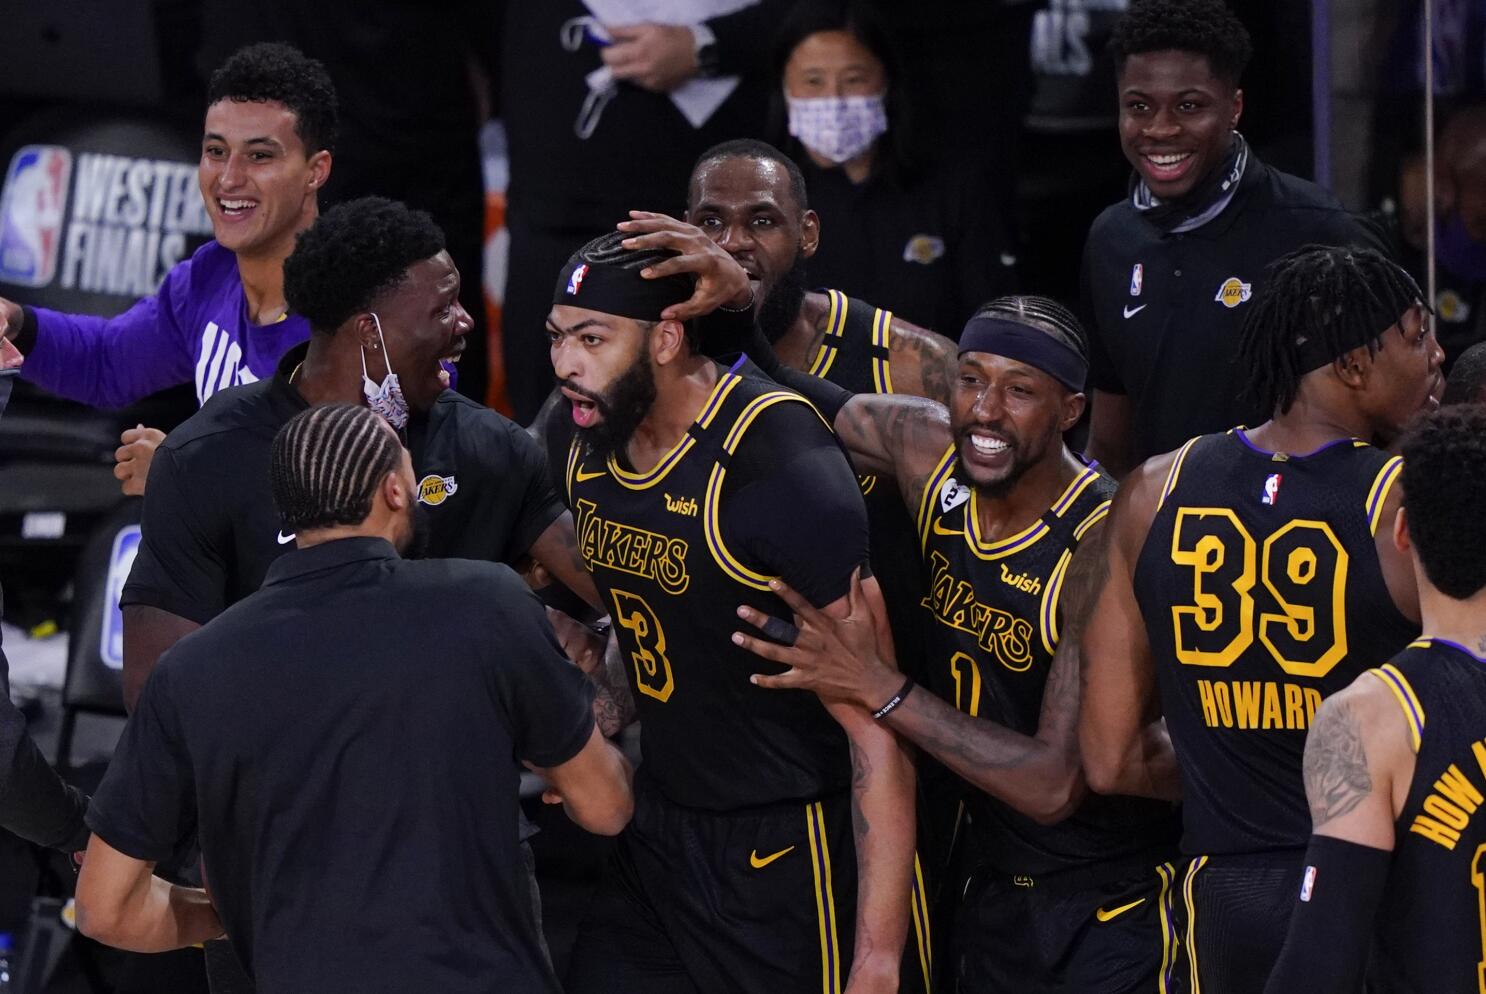 Los Angeles Lakers beat Miami Heat in NBA finals - The Observer